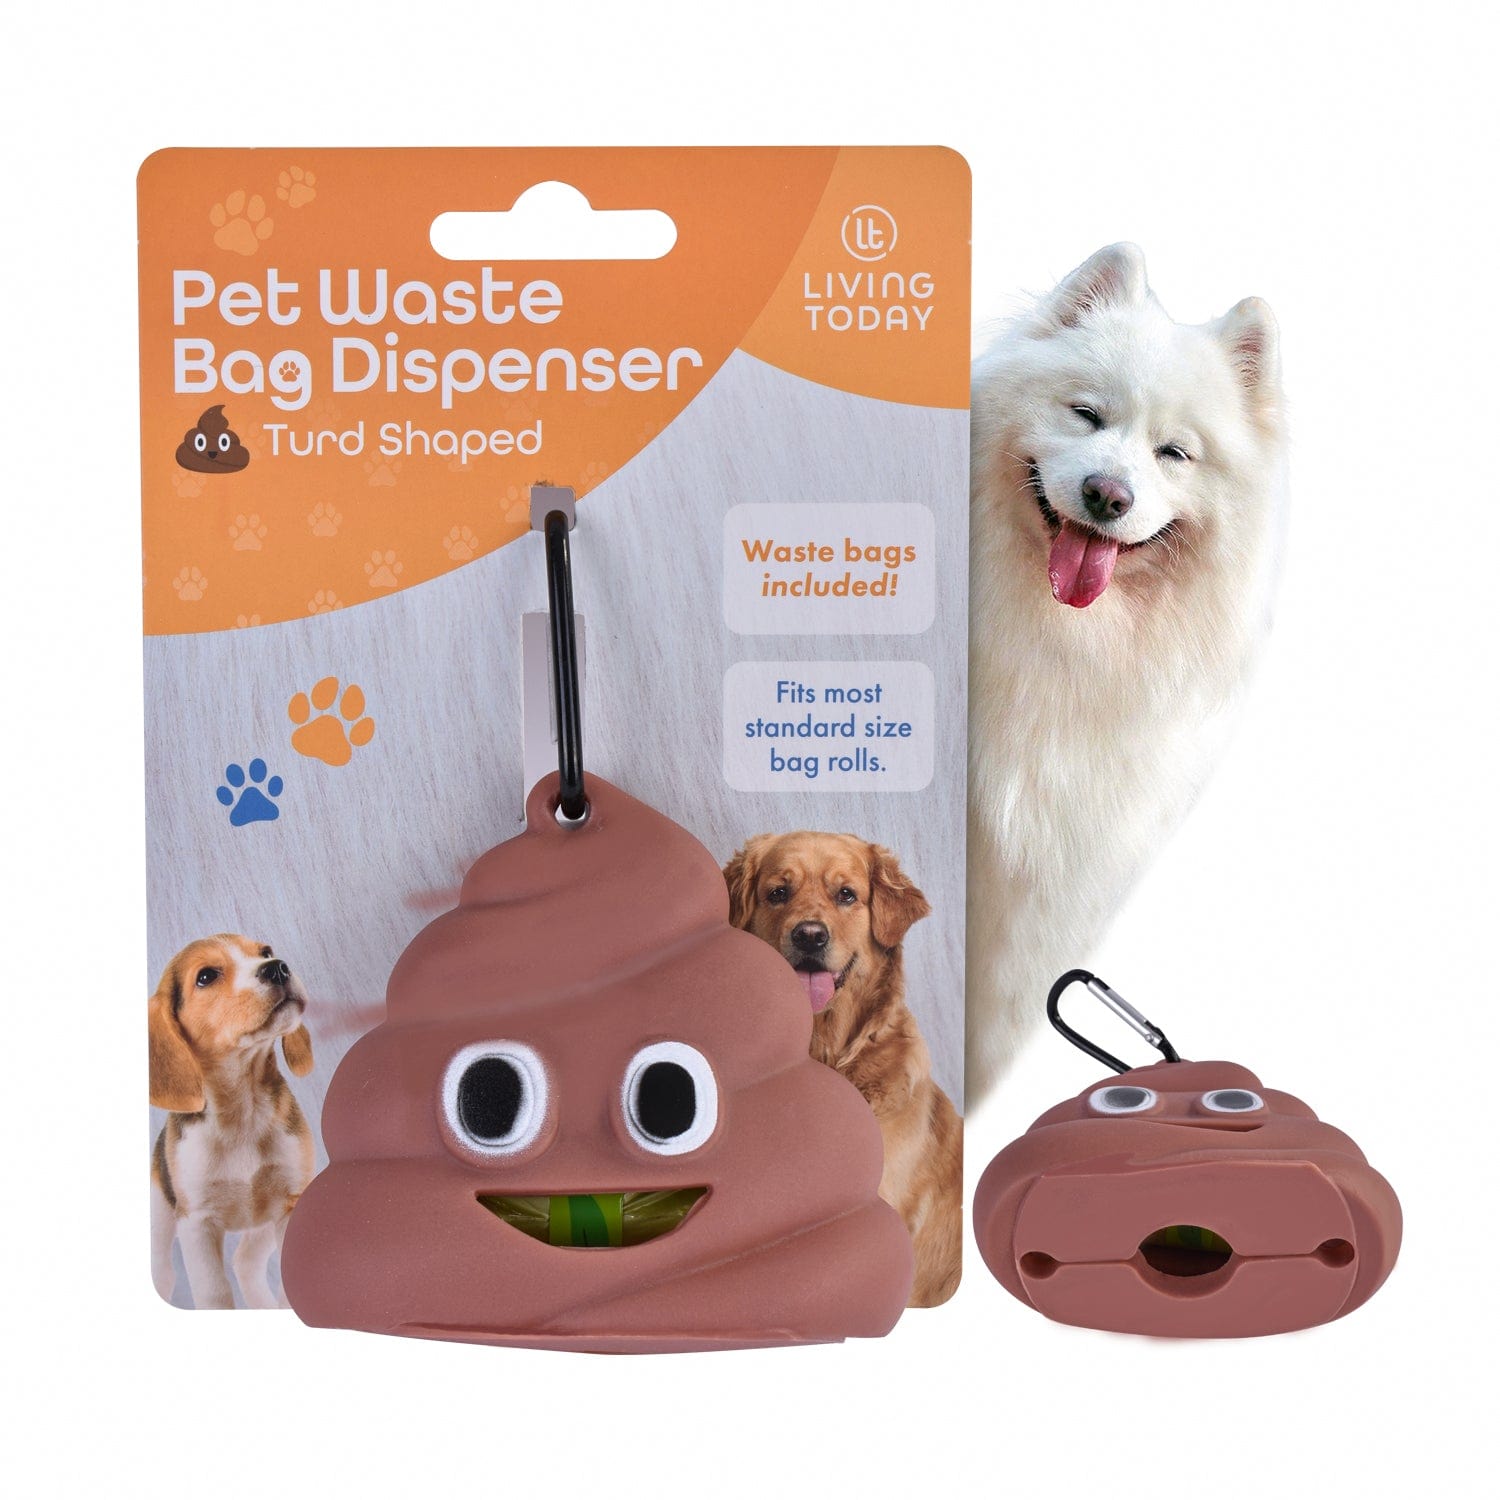 LIVINGTODAY dog poop dispenser and bags LIVINGTODAY Pet Dog Poop Dispenser and 15 Biodegradable Unscented Waste Bags